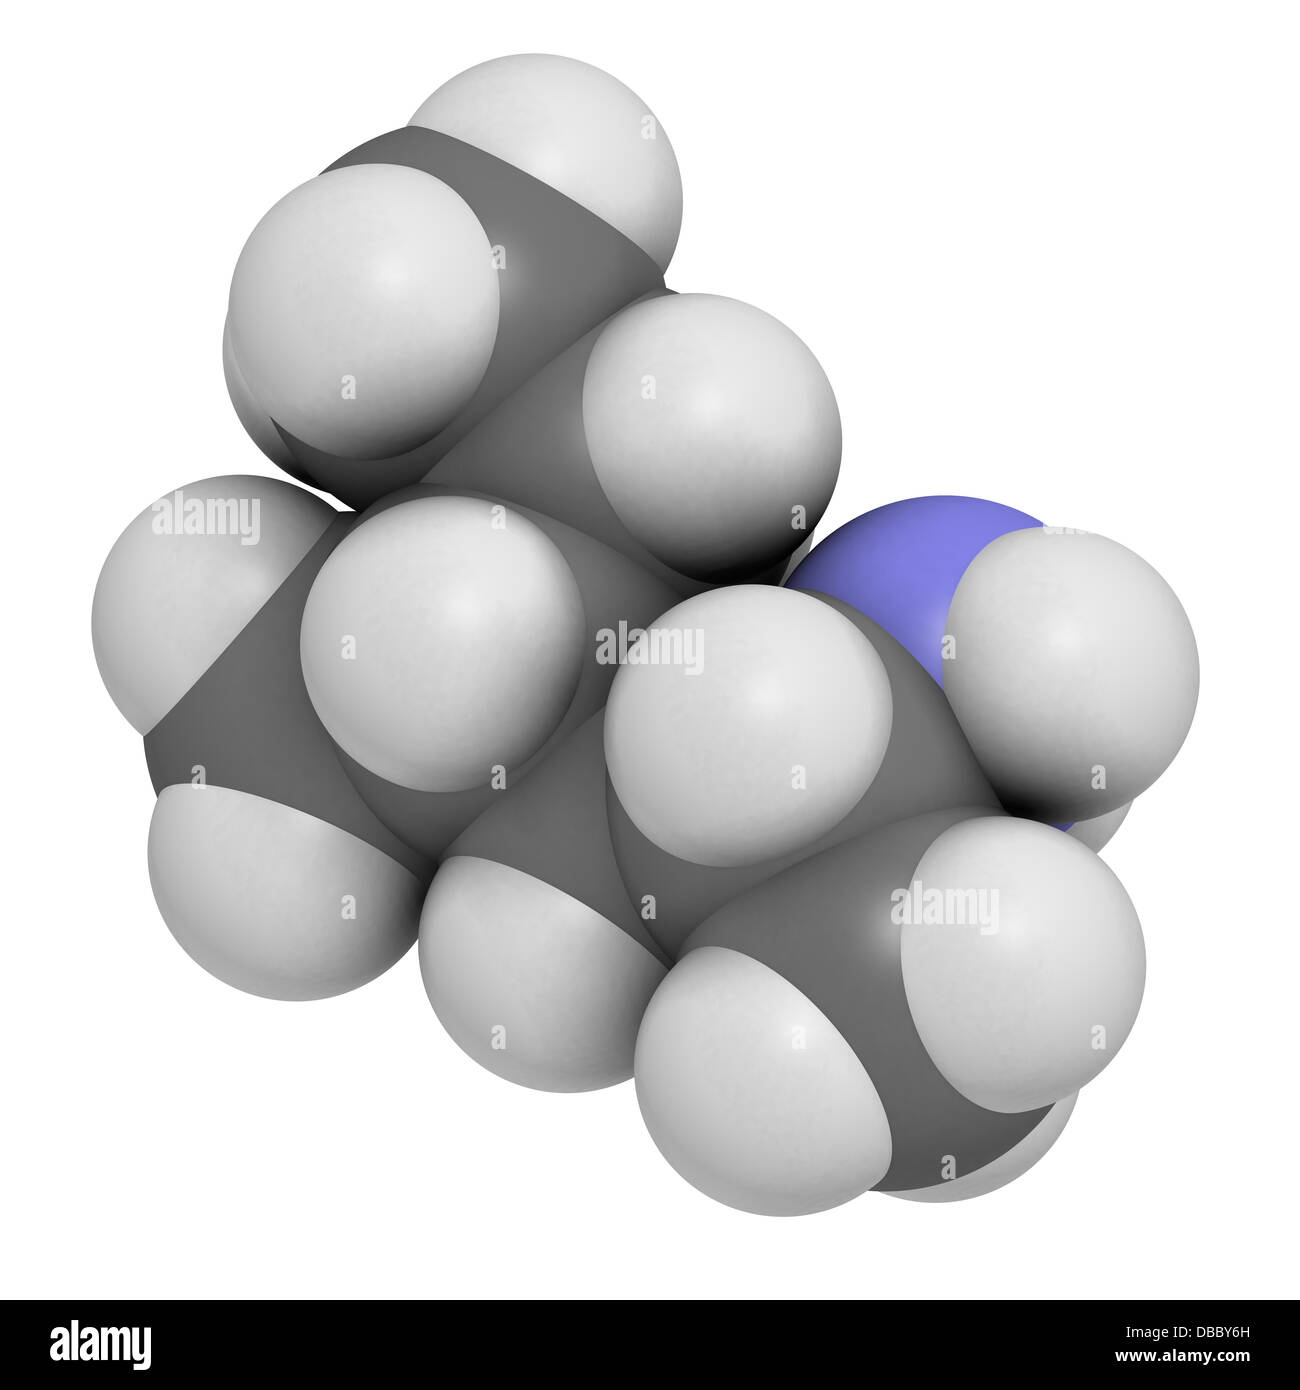 Methylhexanamine (1,3-dimethylamylamine, DMAA) stimulant drug, chemical structure. Atoms are represented as spheres. Stock Photo